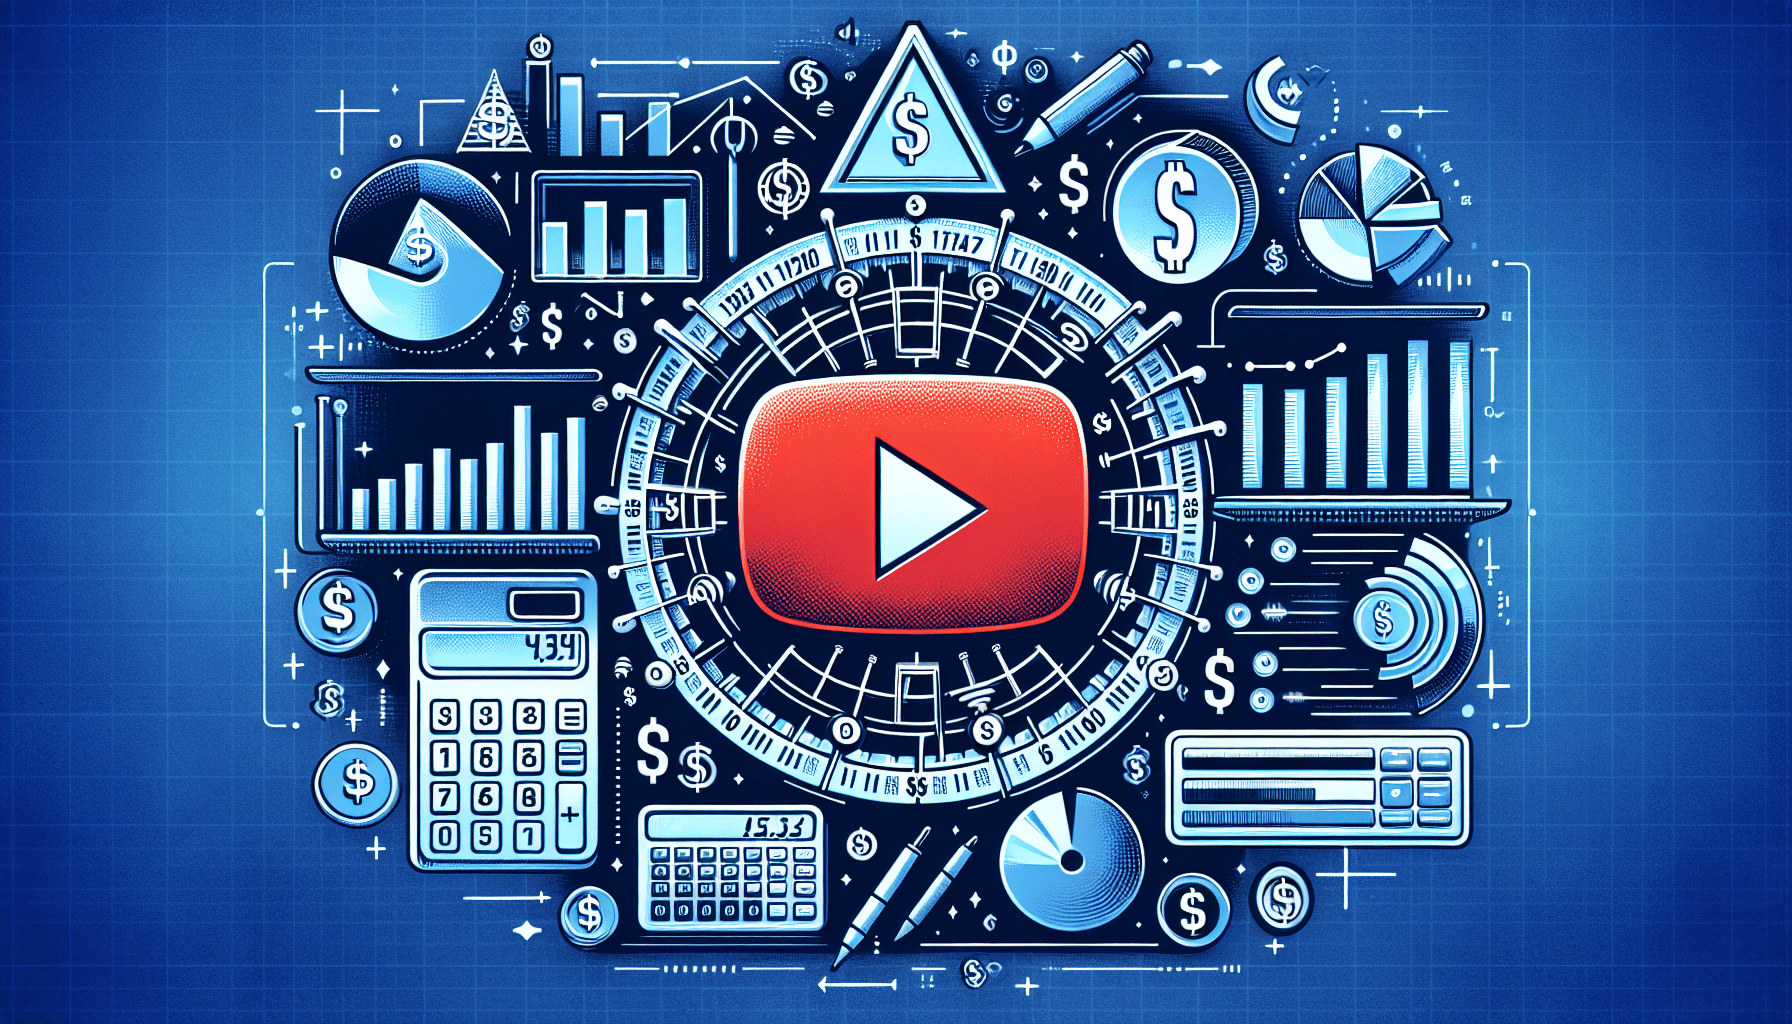 How to Calculate Your Earnings on YouTube